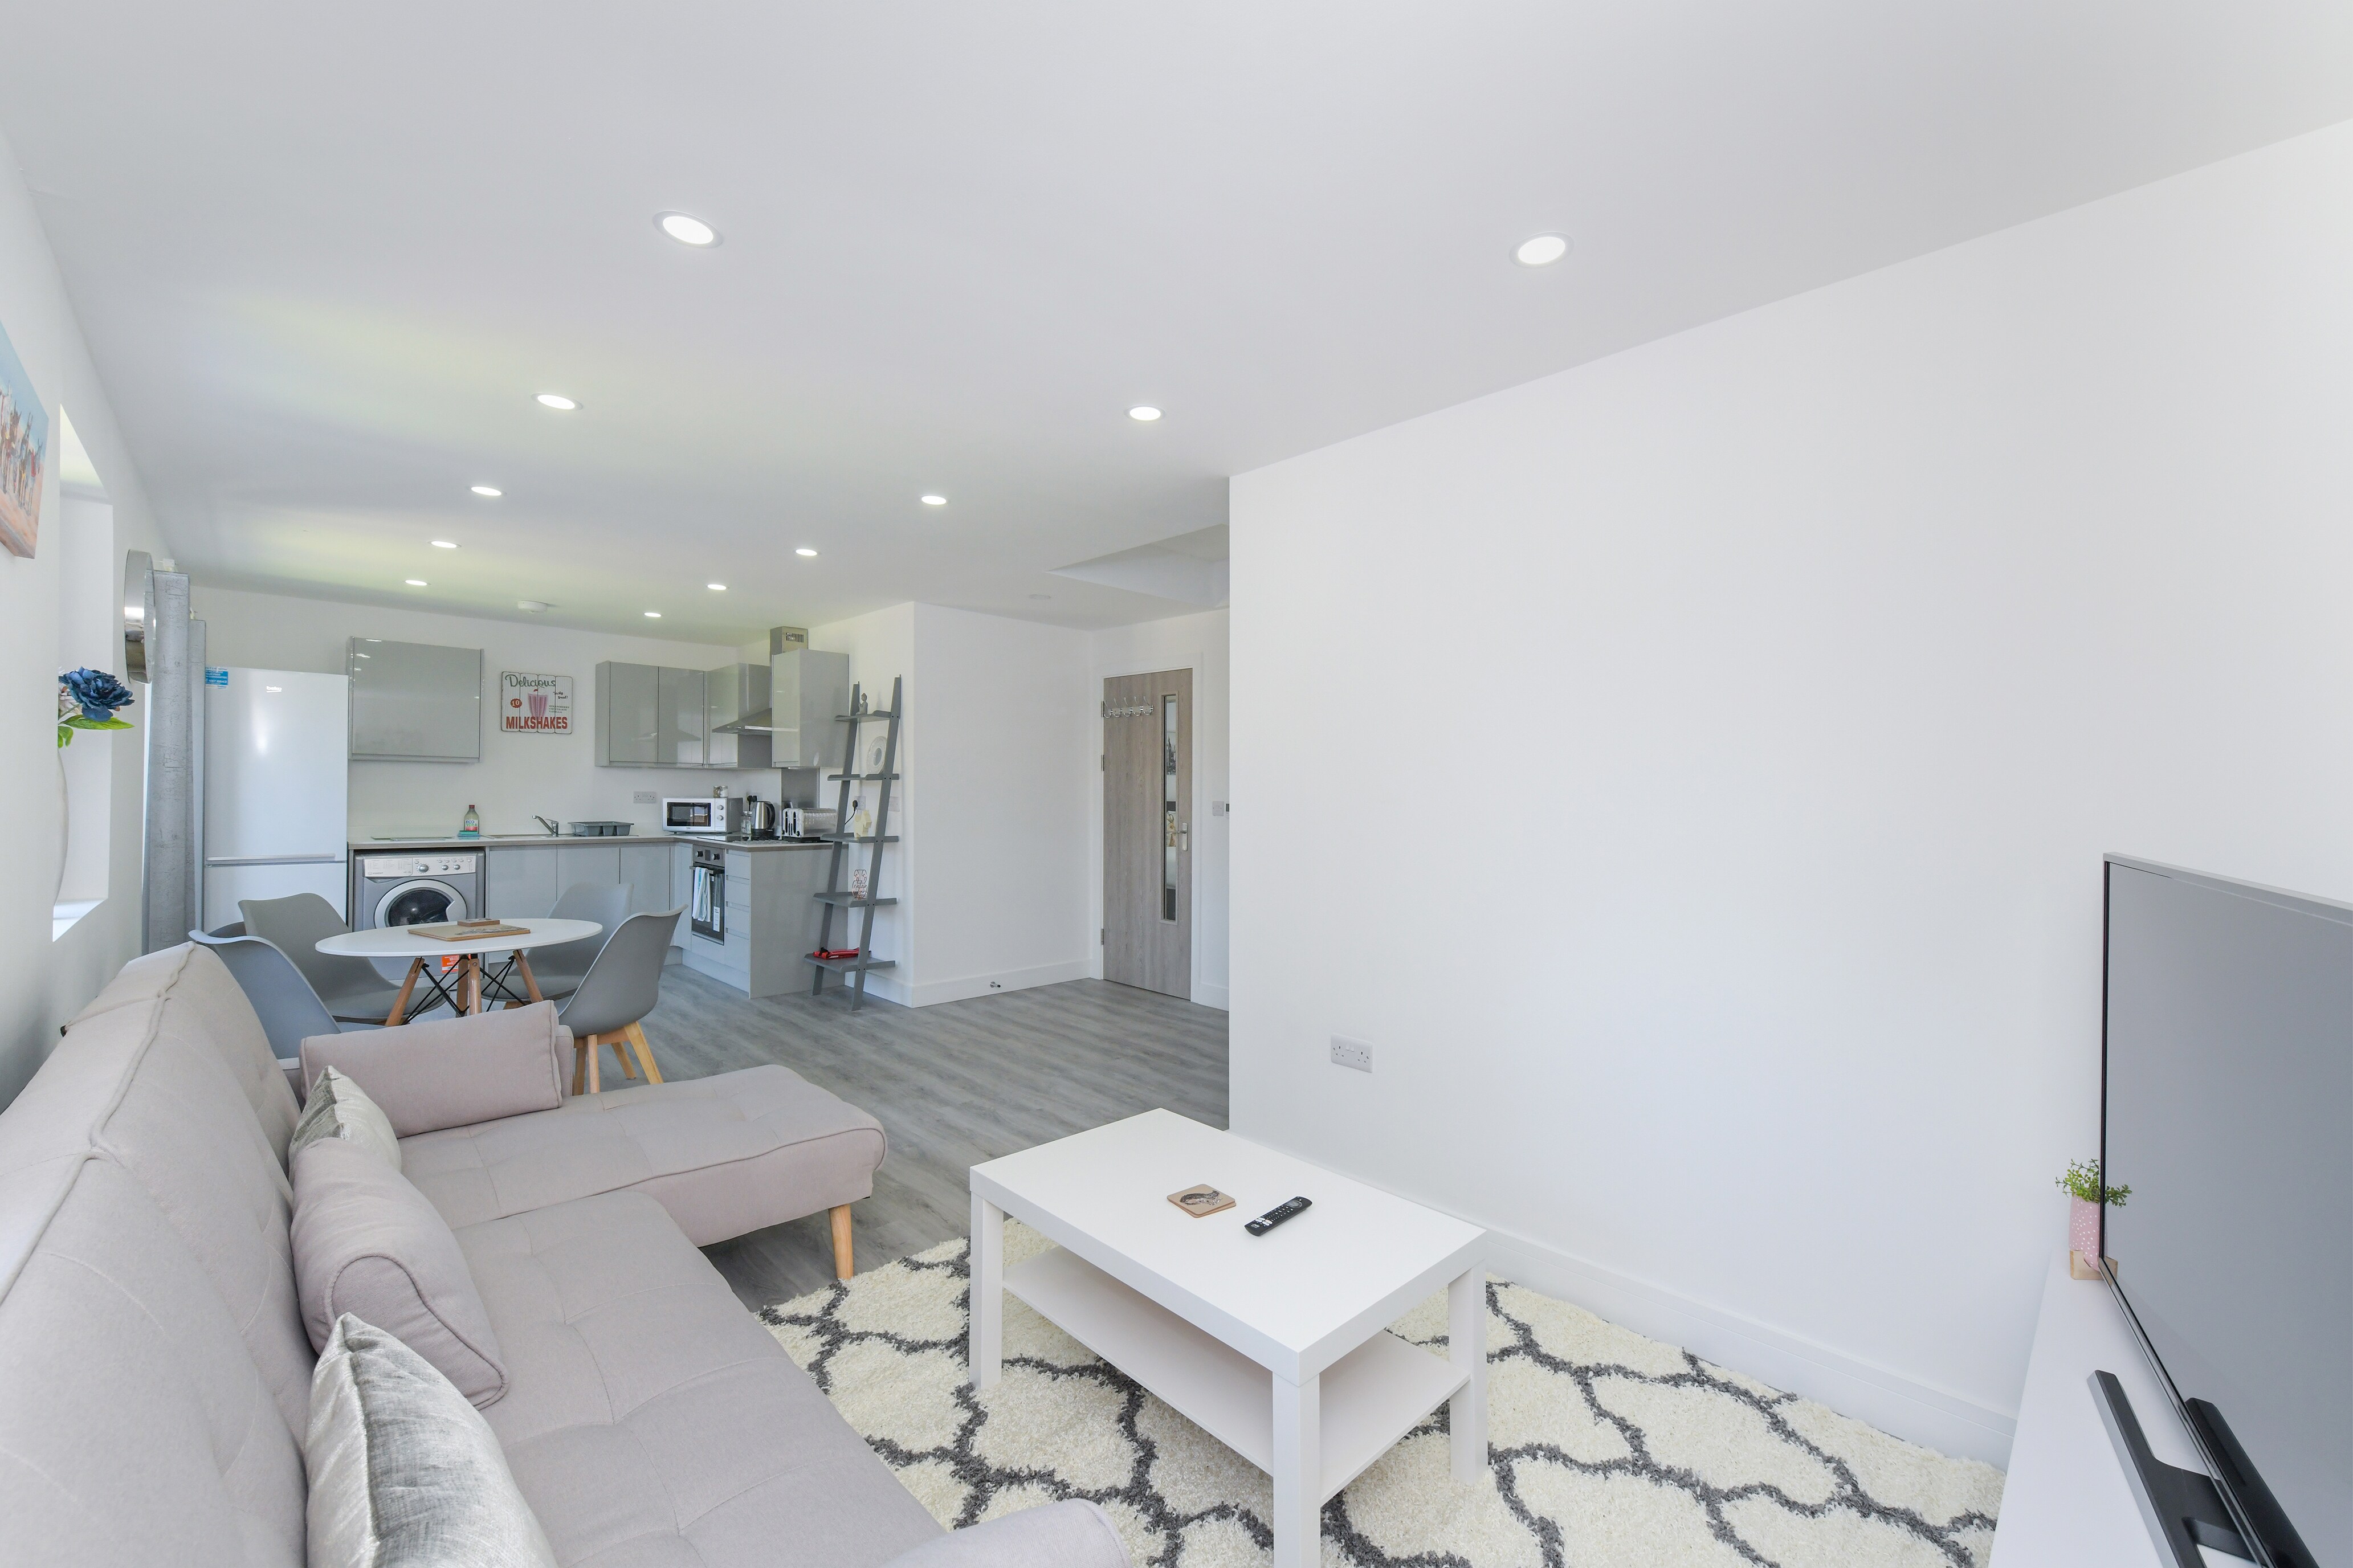 Contemporary 2bed Hideaway, Low Carbon, Parking